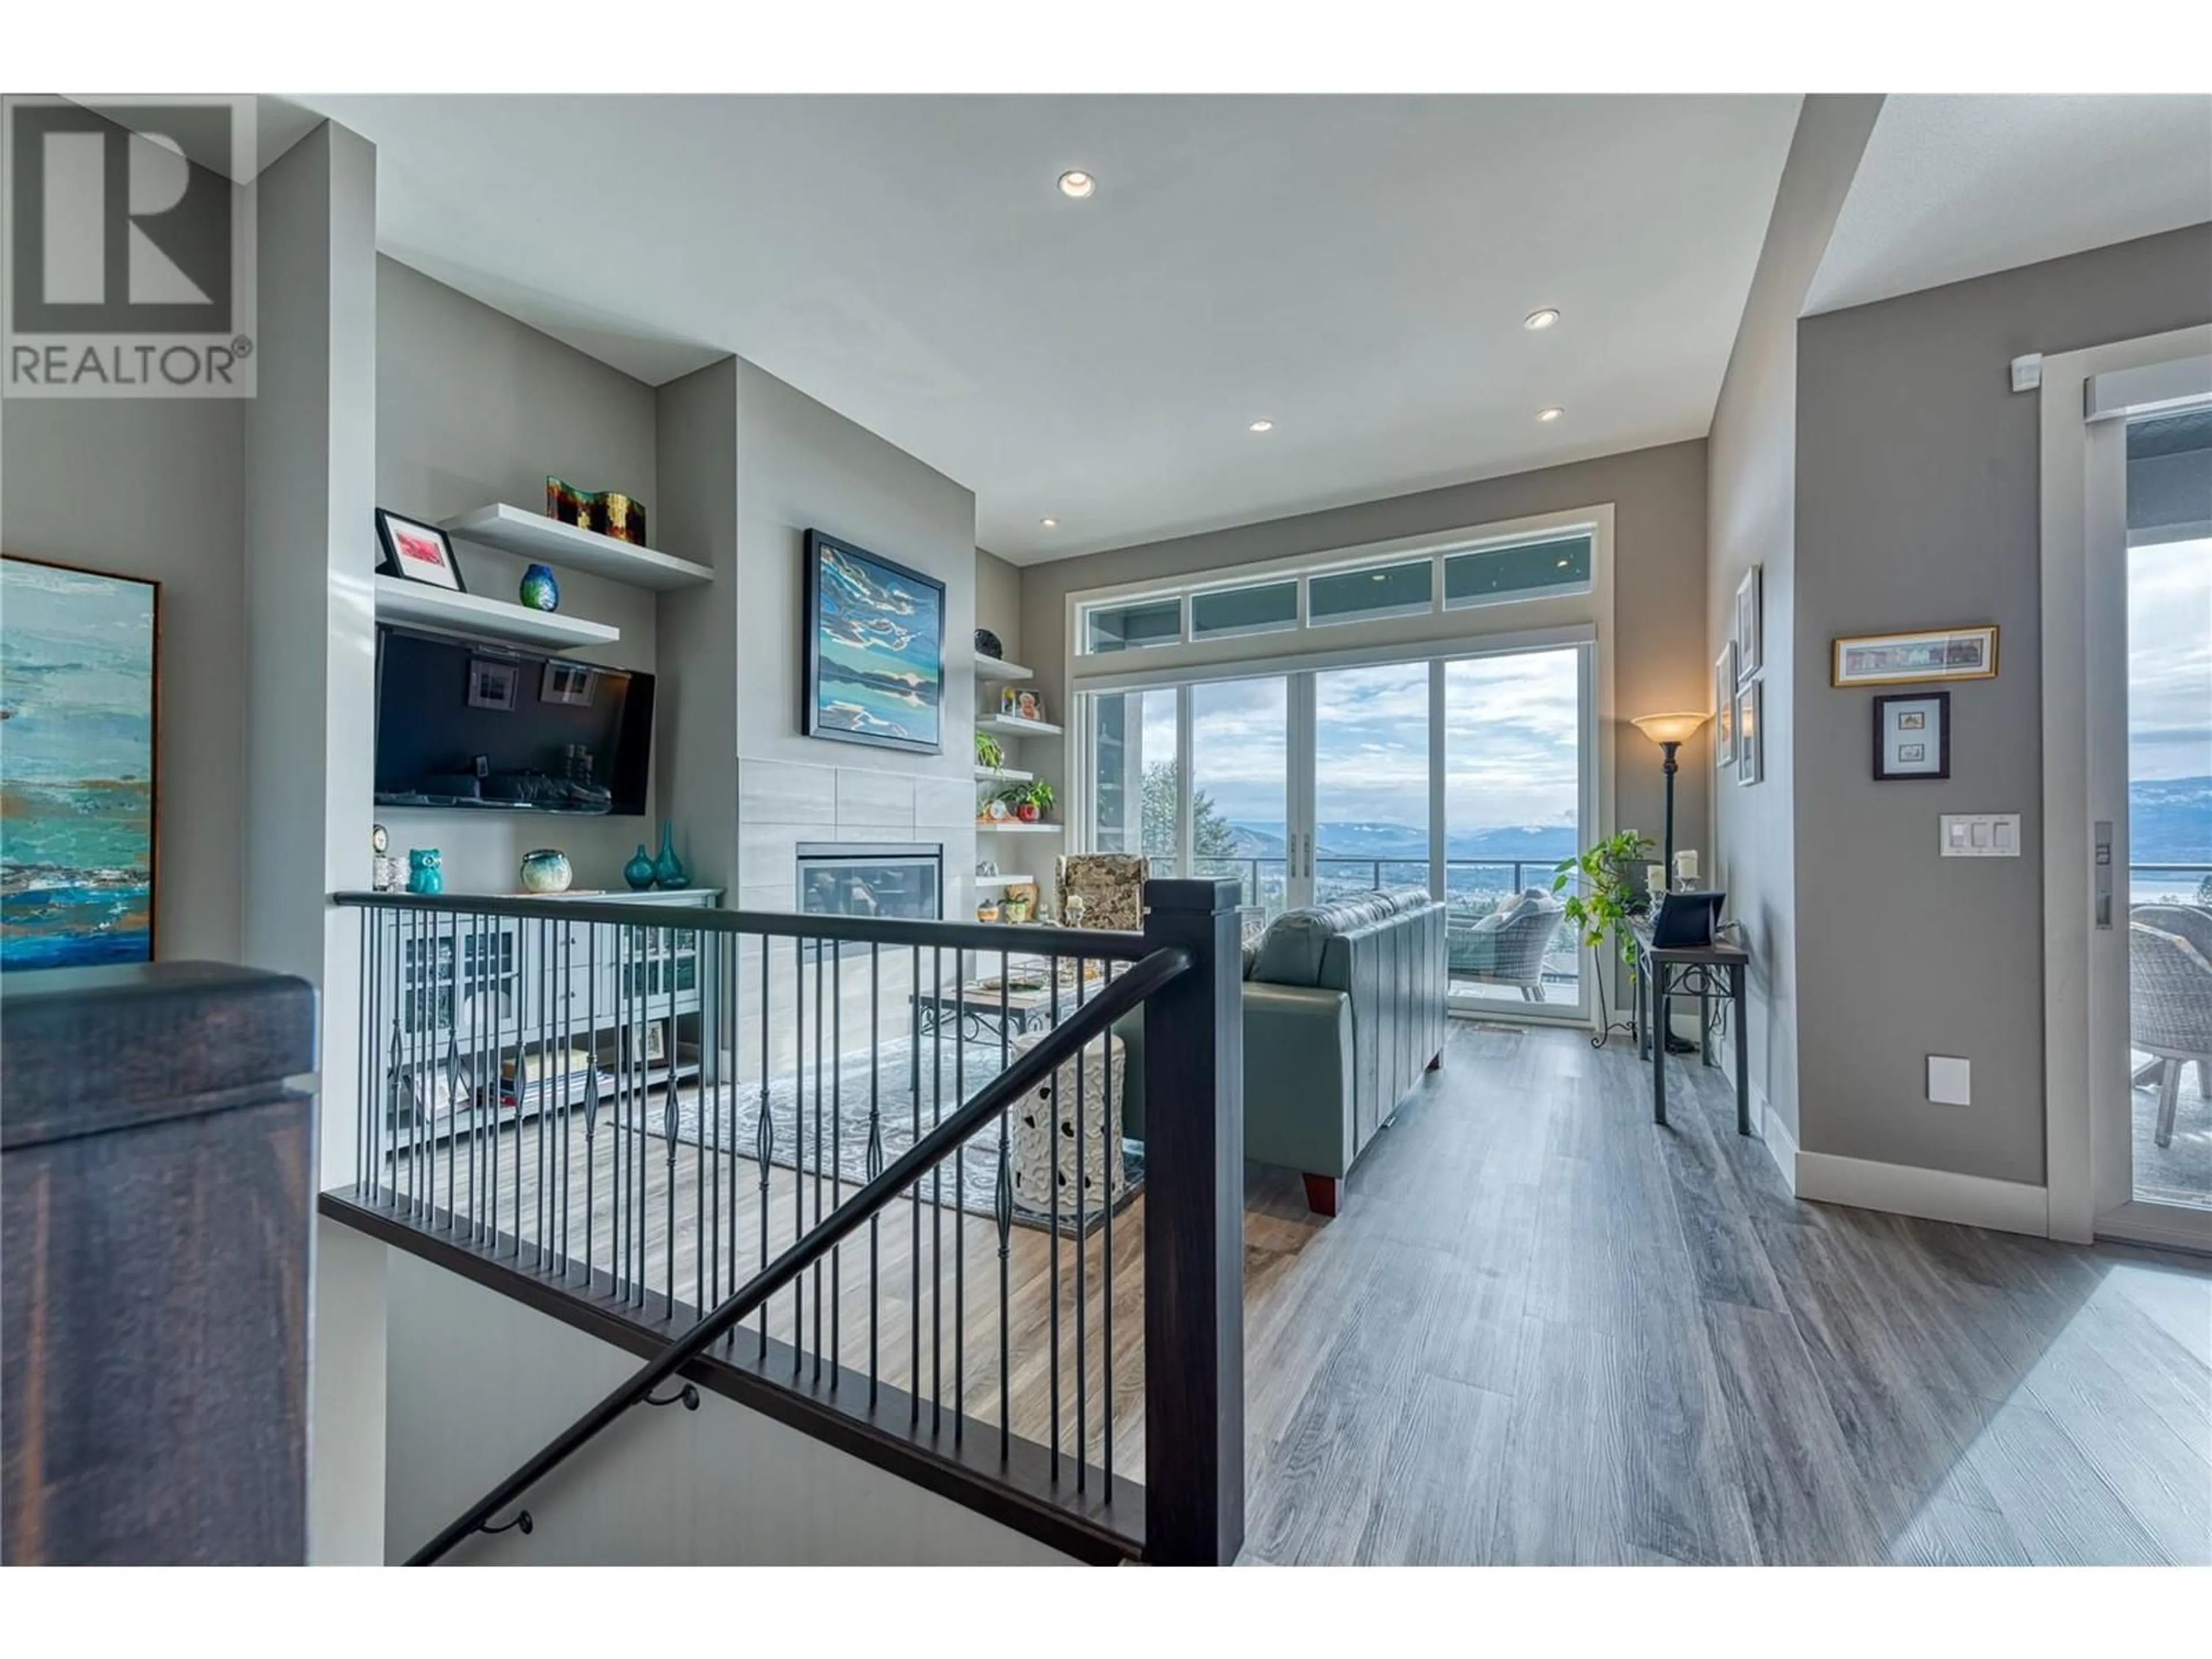 Indoor entryway for 3579 Ranch Road, West Kelowna British Columbia V4T1A1